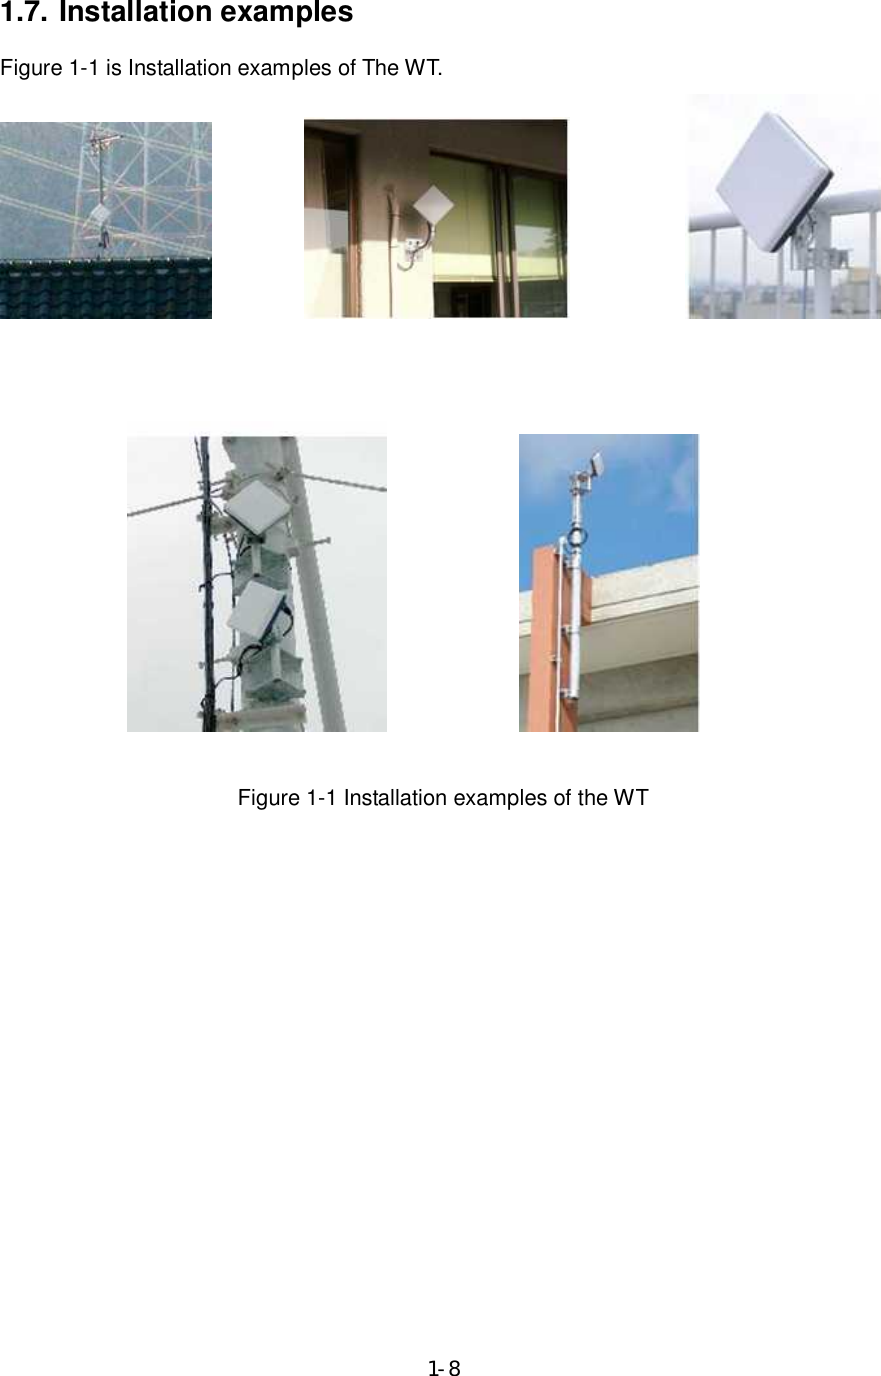  1-8  1.7. Installation examples   Figure 1-1 is Installation examples of The WT.   Figure 1-1 Installation examples of the WT 